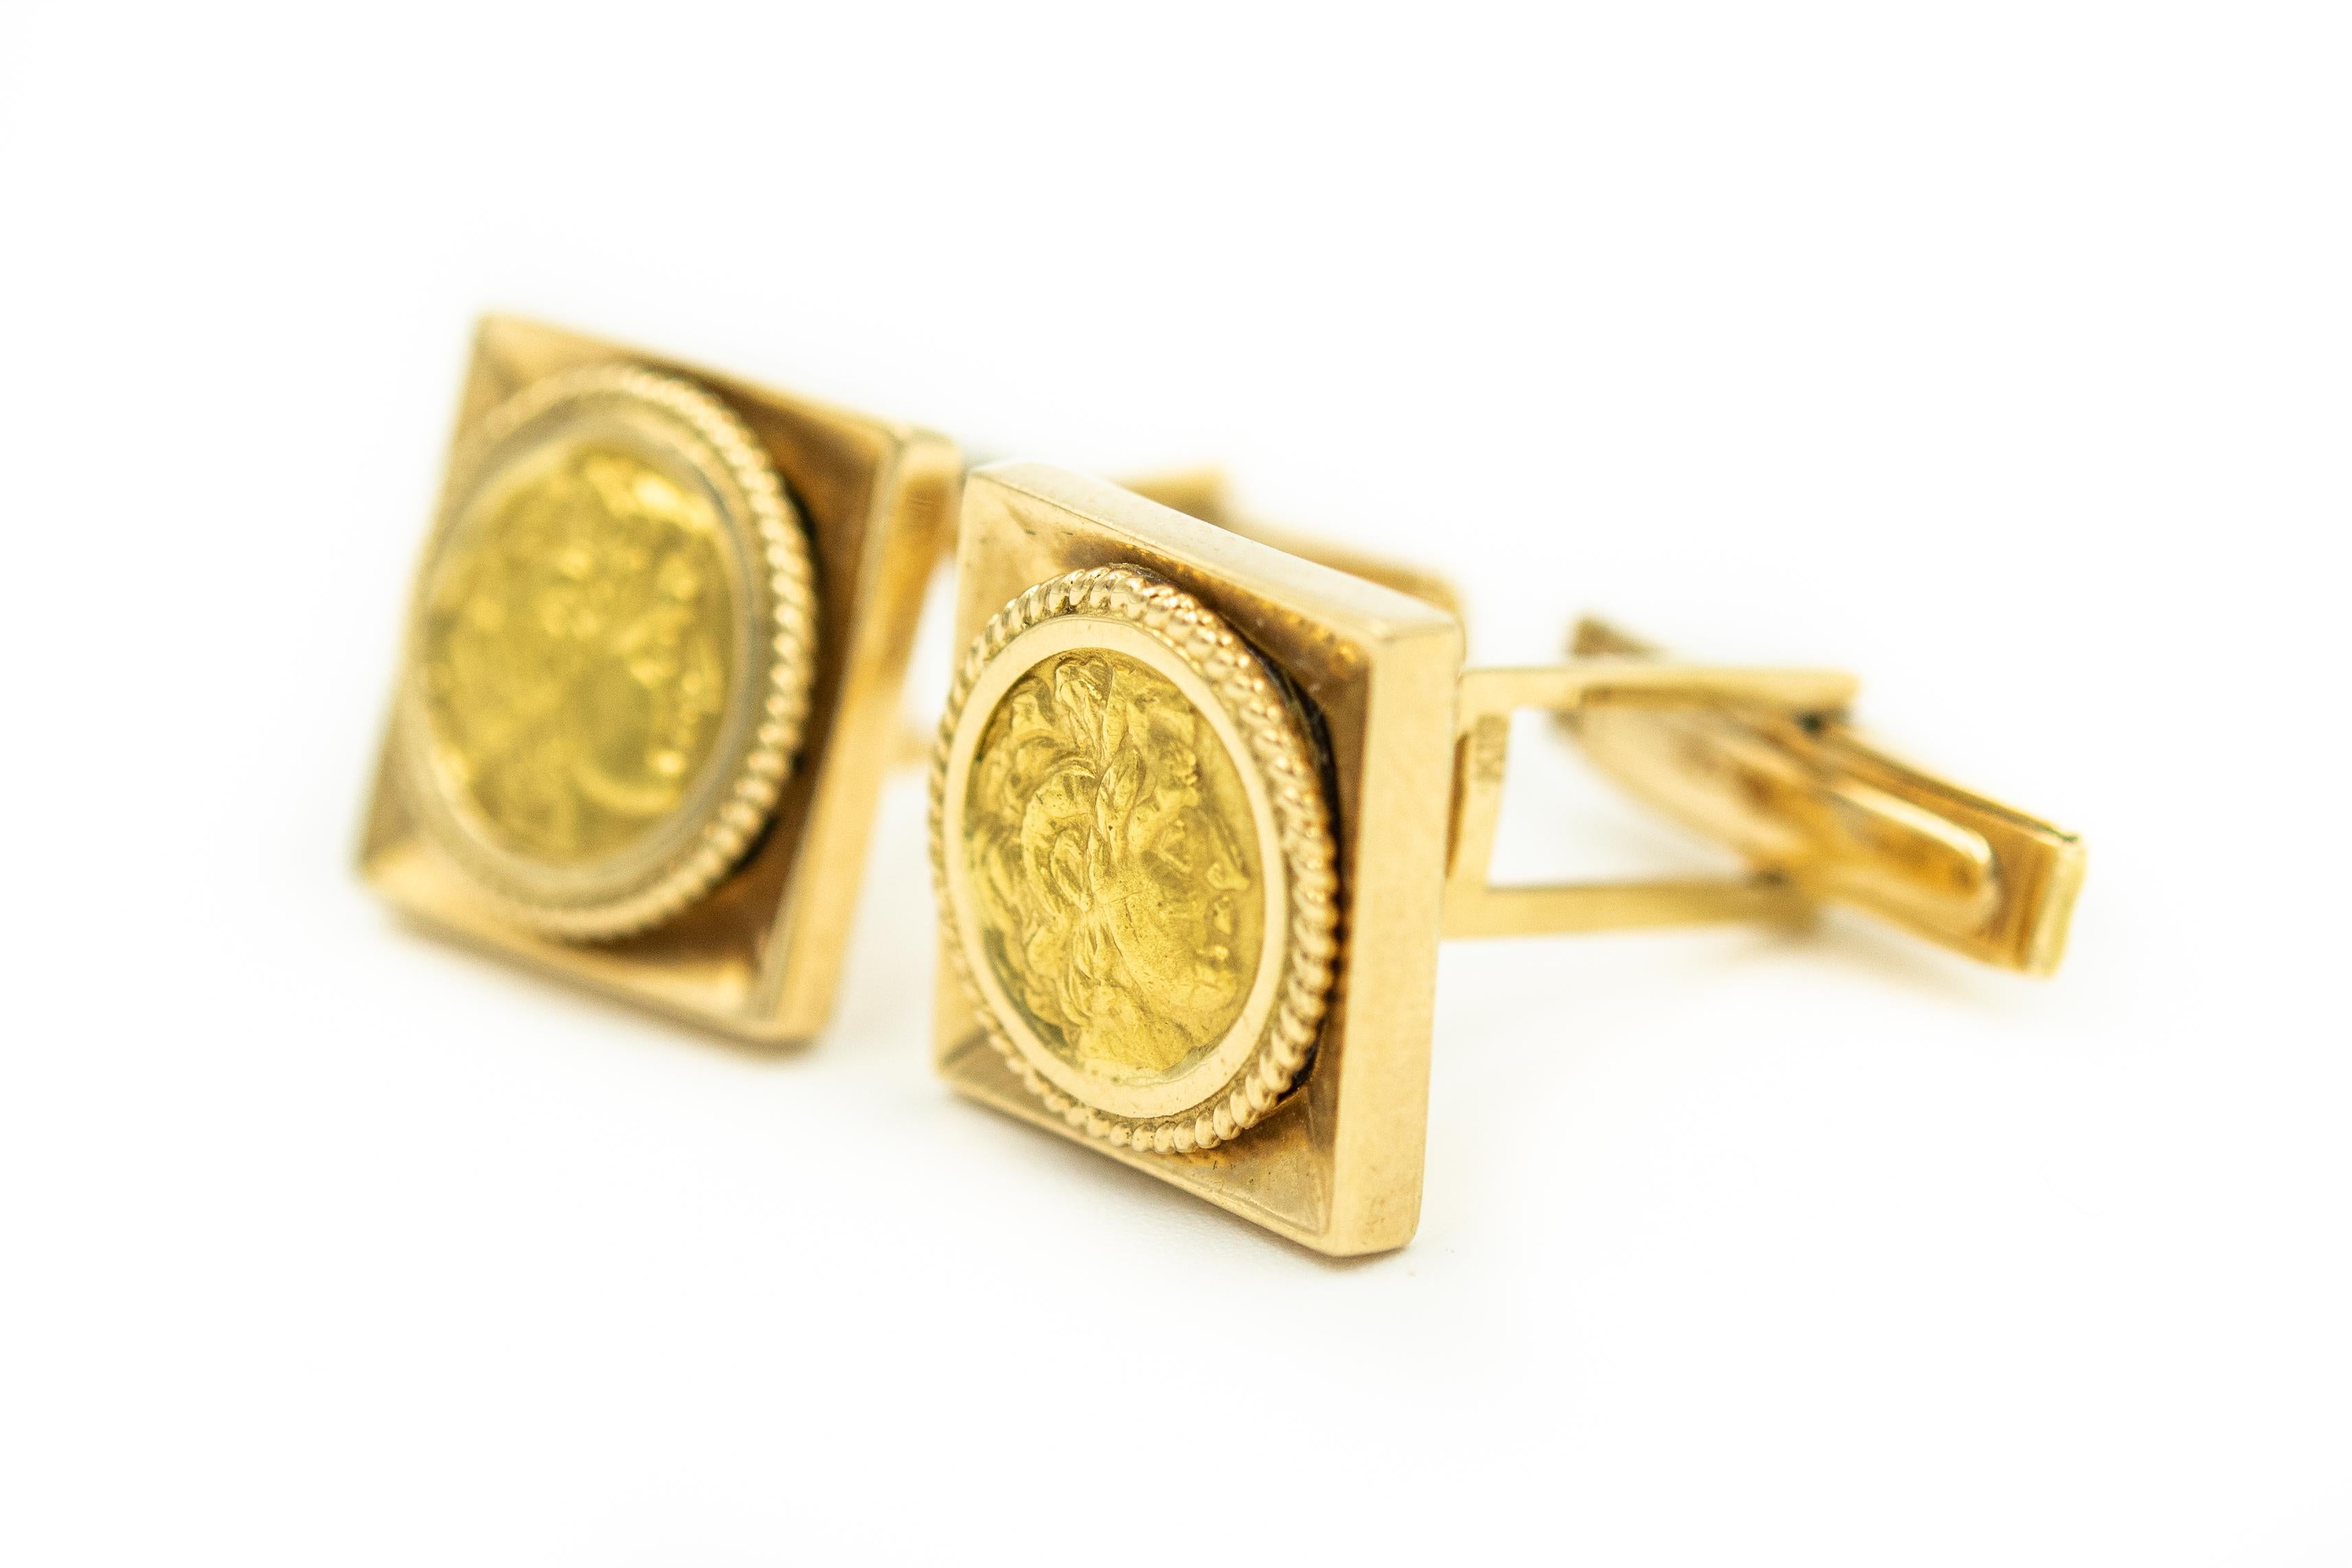 Elegant 18k yellow gold square cufflinks featuring a raised profile portrait of an ancient Grecian or Roman man.  The backs are whale back t-bars so it’s very easy to put them on.

Marked A.61 and K18

